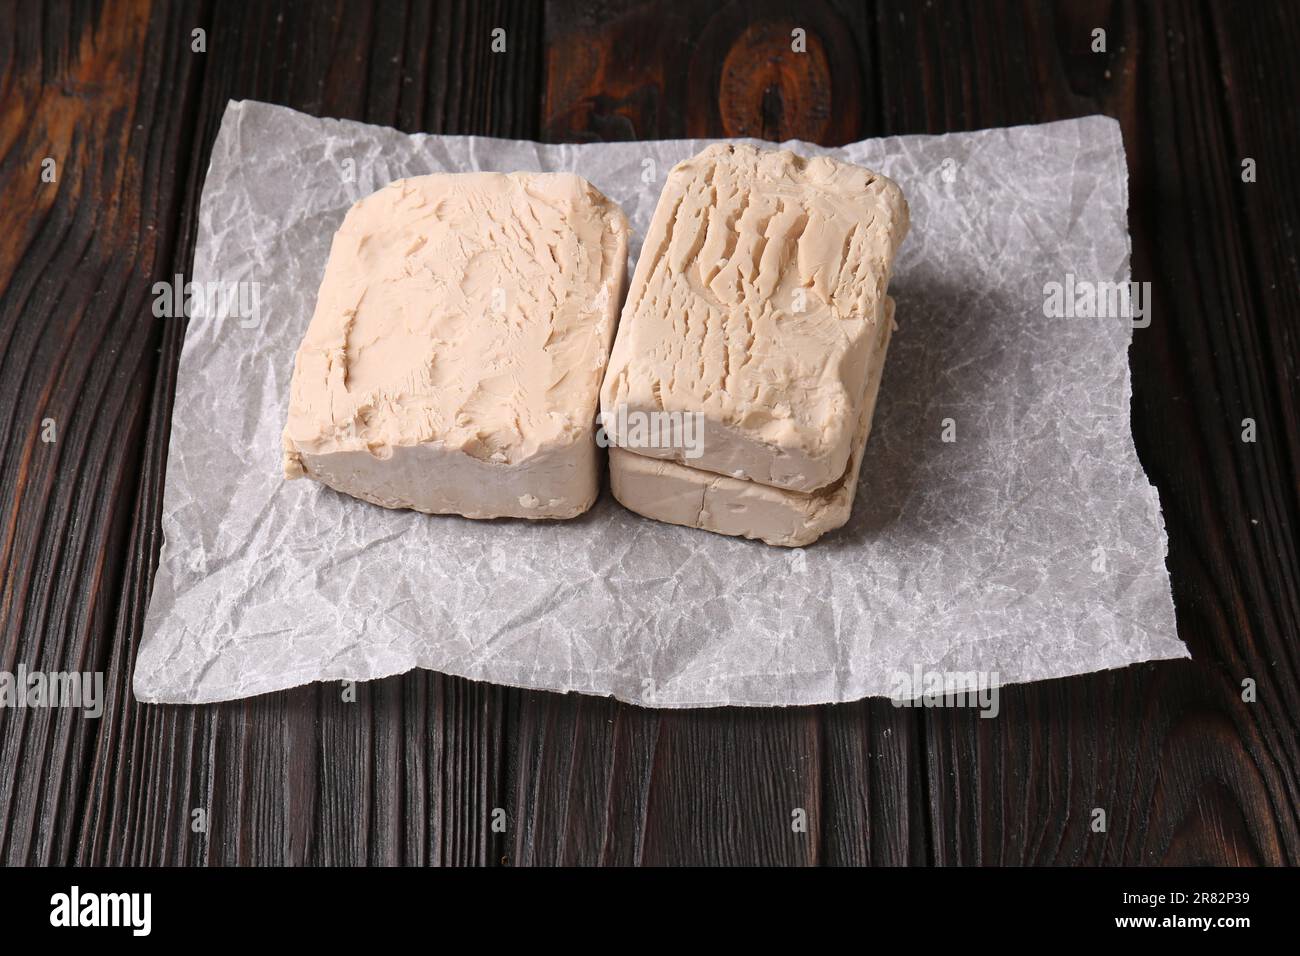 Pieces of fresh compressed yeast on wooden table Stock Photo